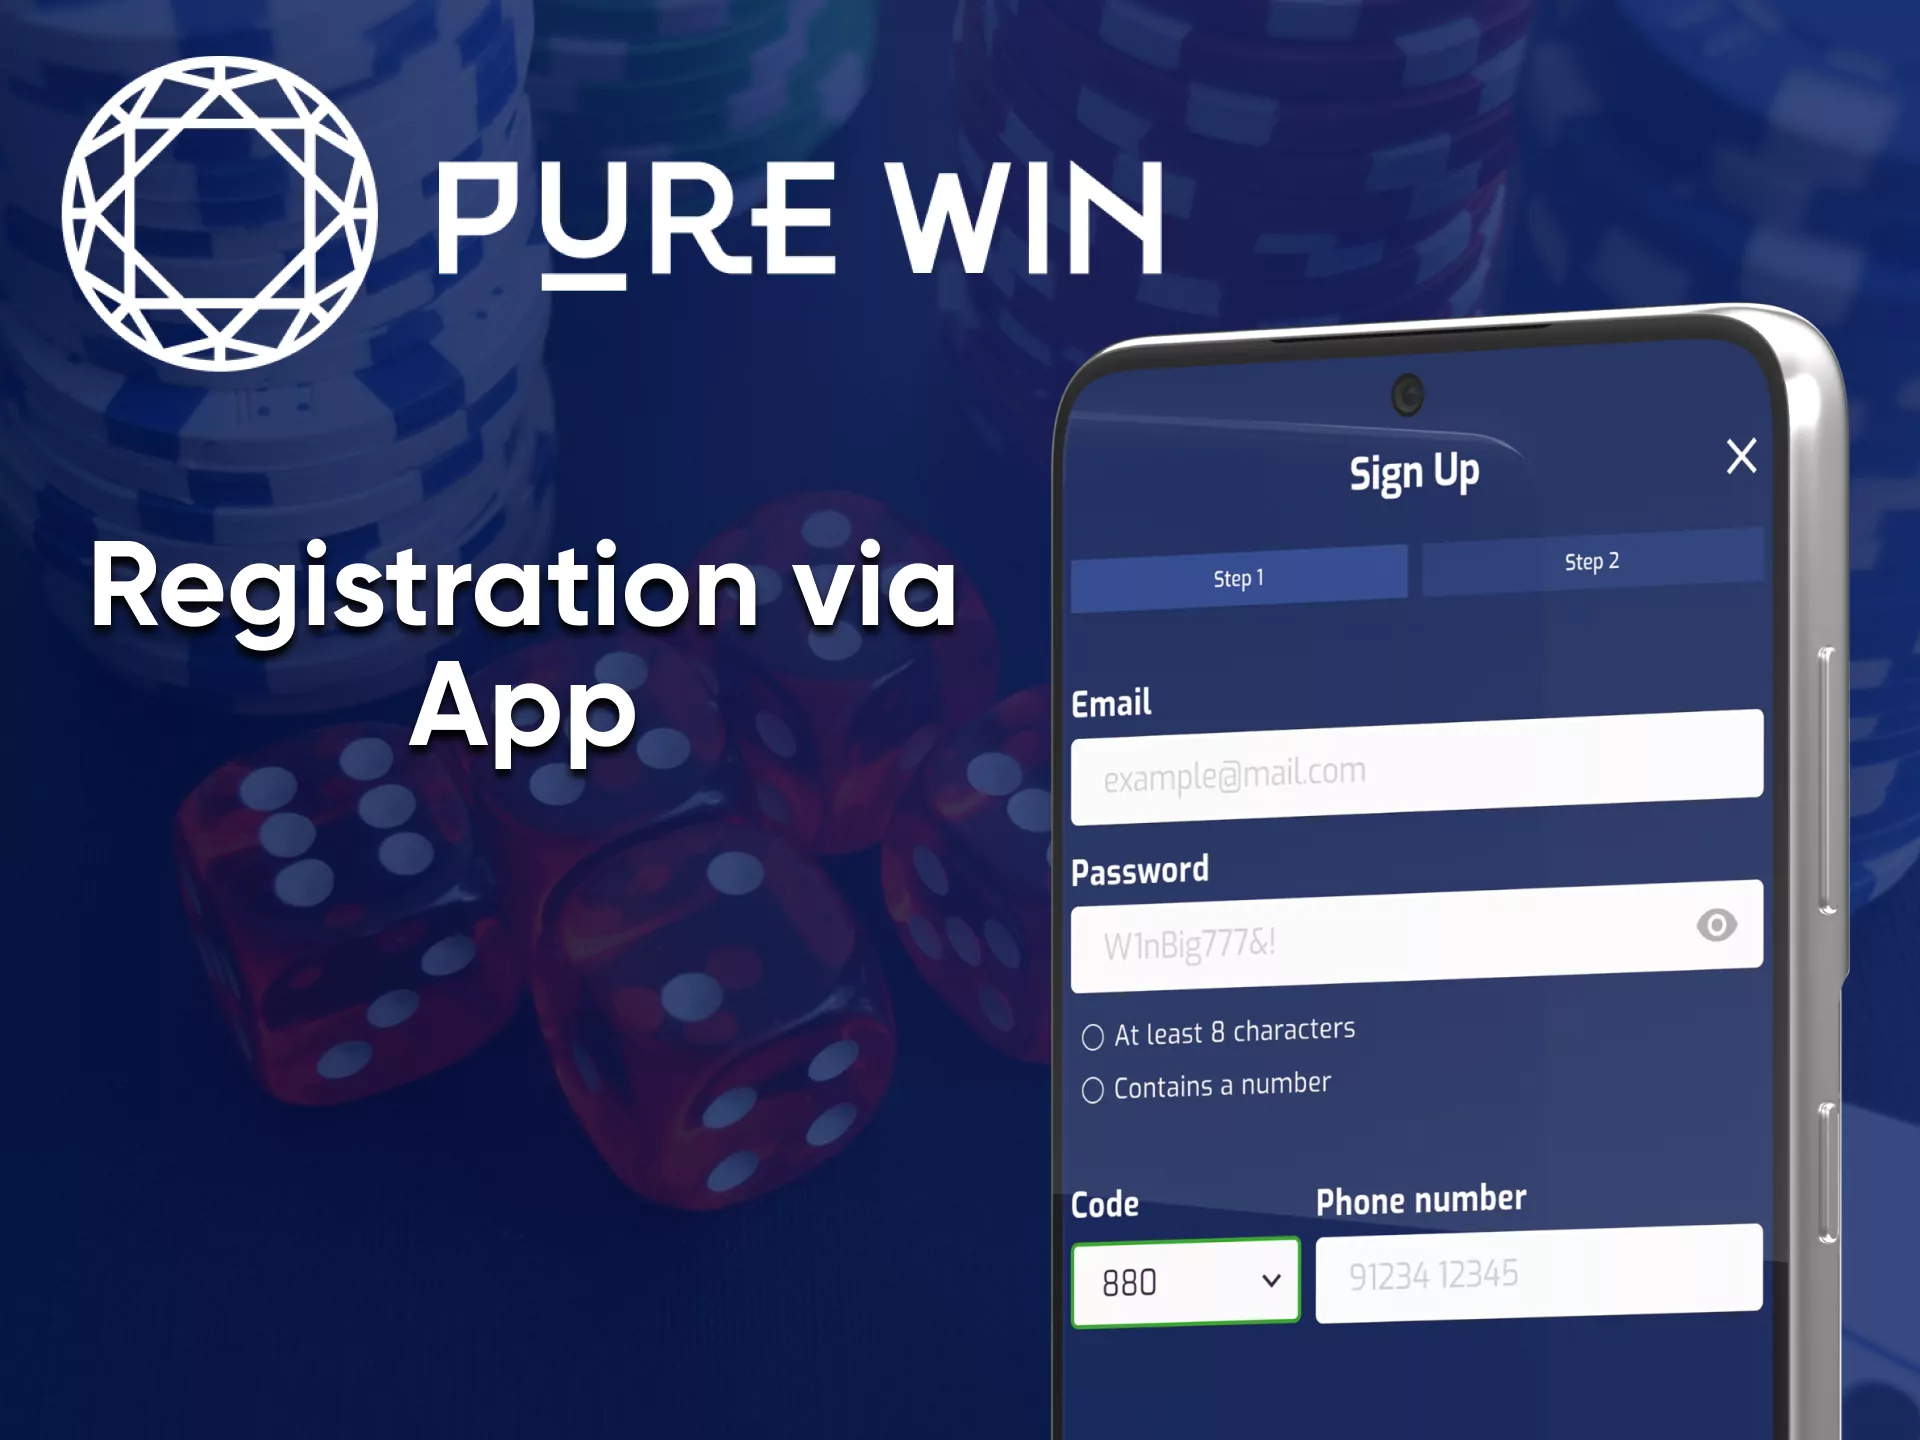 Create an account in the Pure Win app to start playing on your mobile device.